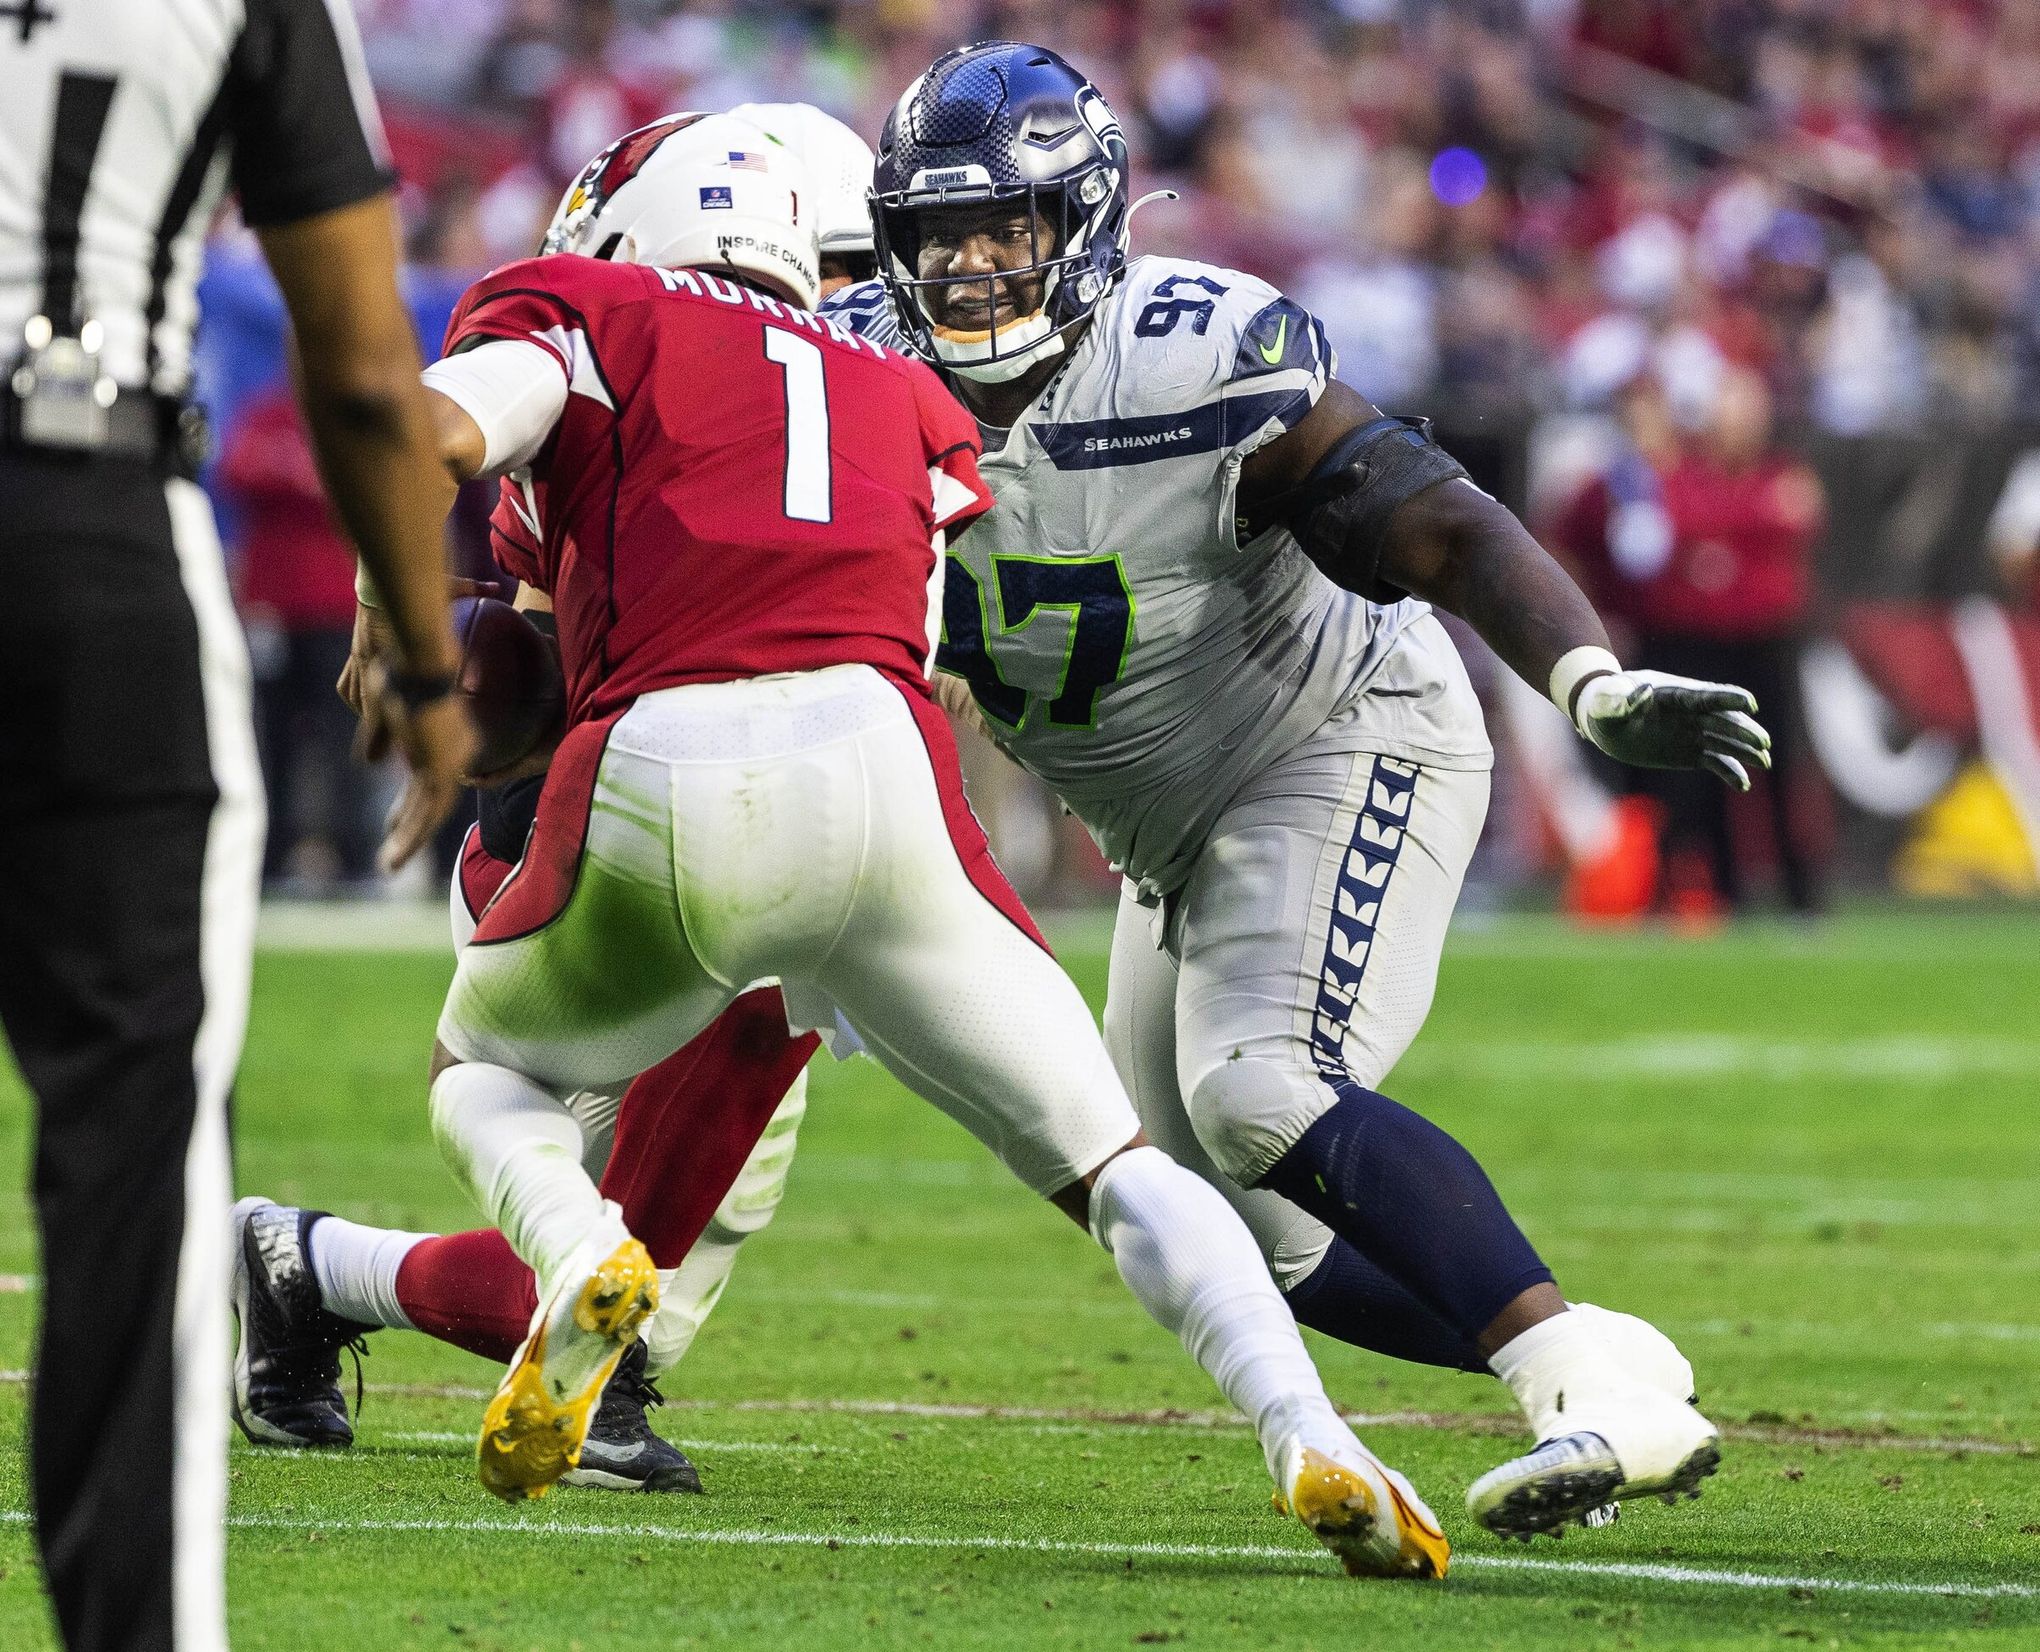 Seahawks position overview: What changes could come to defensive line?